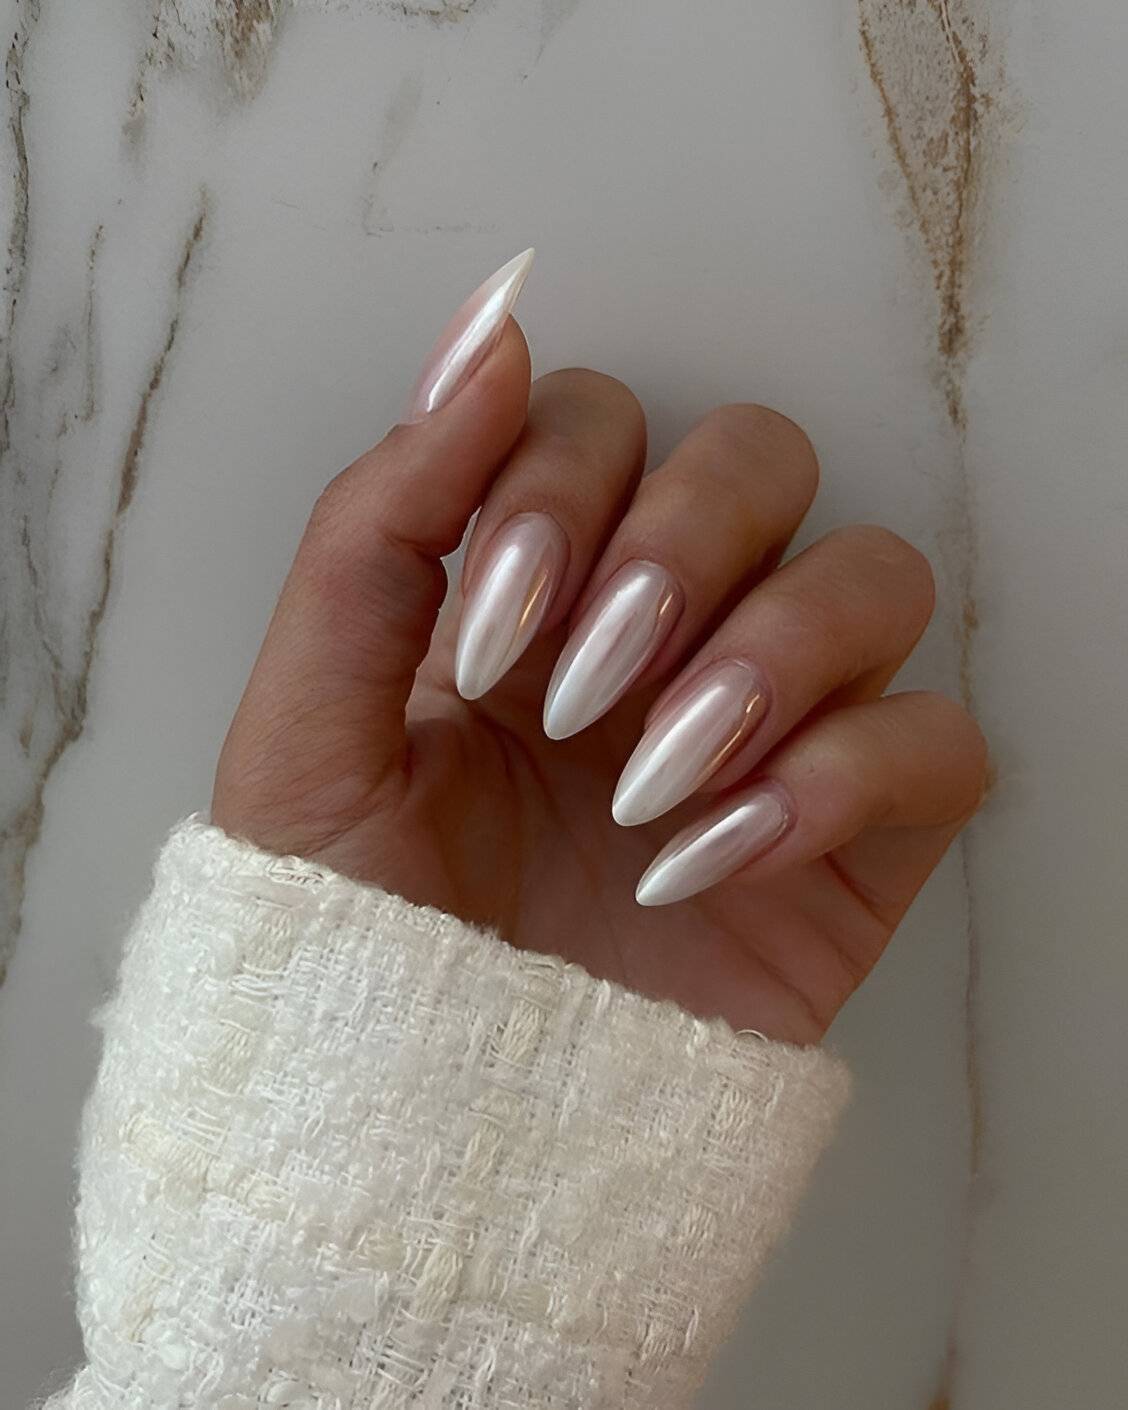 30 Chic Chrome Nail Designs For The Ultimate Glam Look - 217